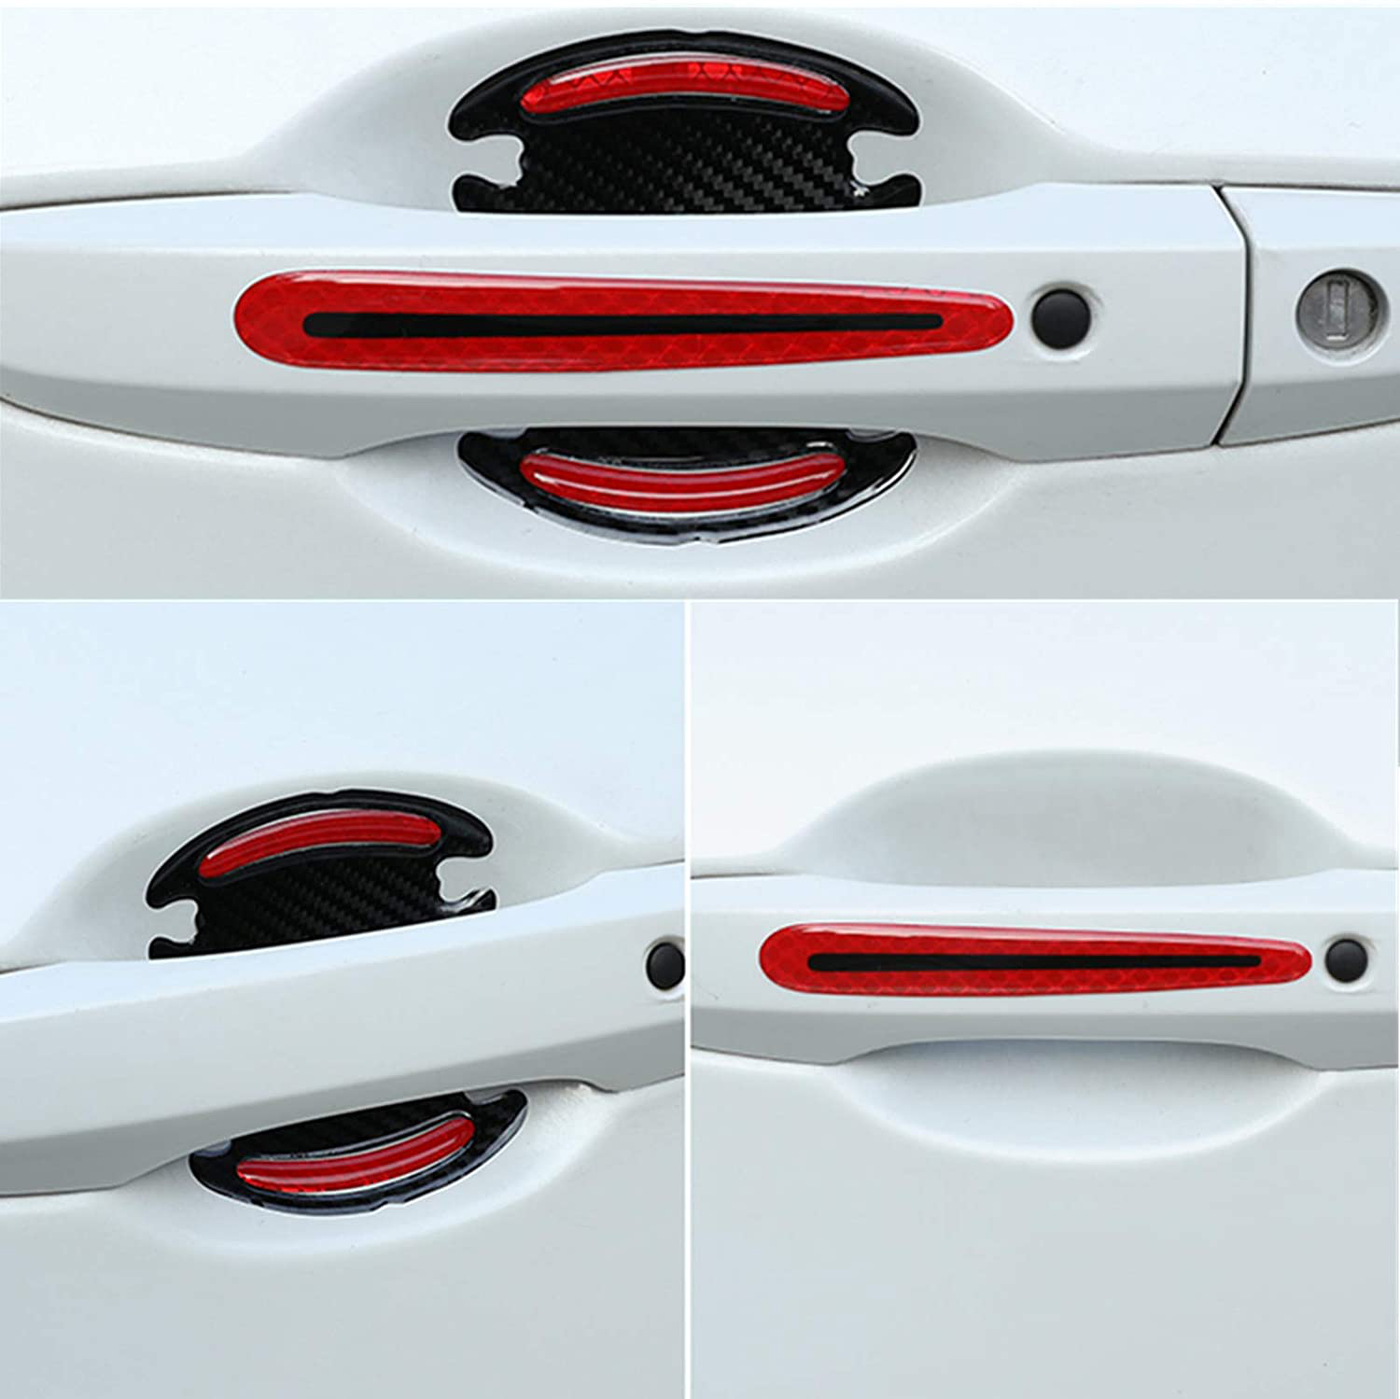 Car Outer Wrist Door Handle Reflective Stickers Universal Safety Reflective Warning Scratch Resistant Stickers 8PCS